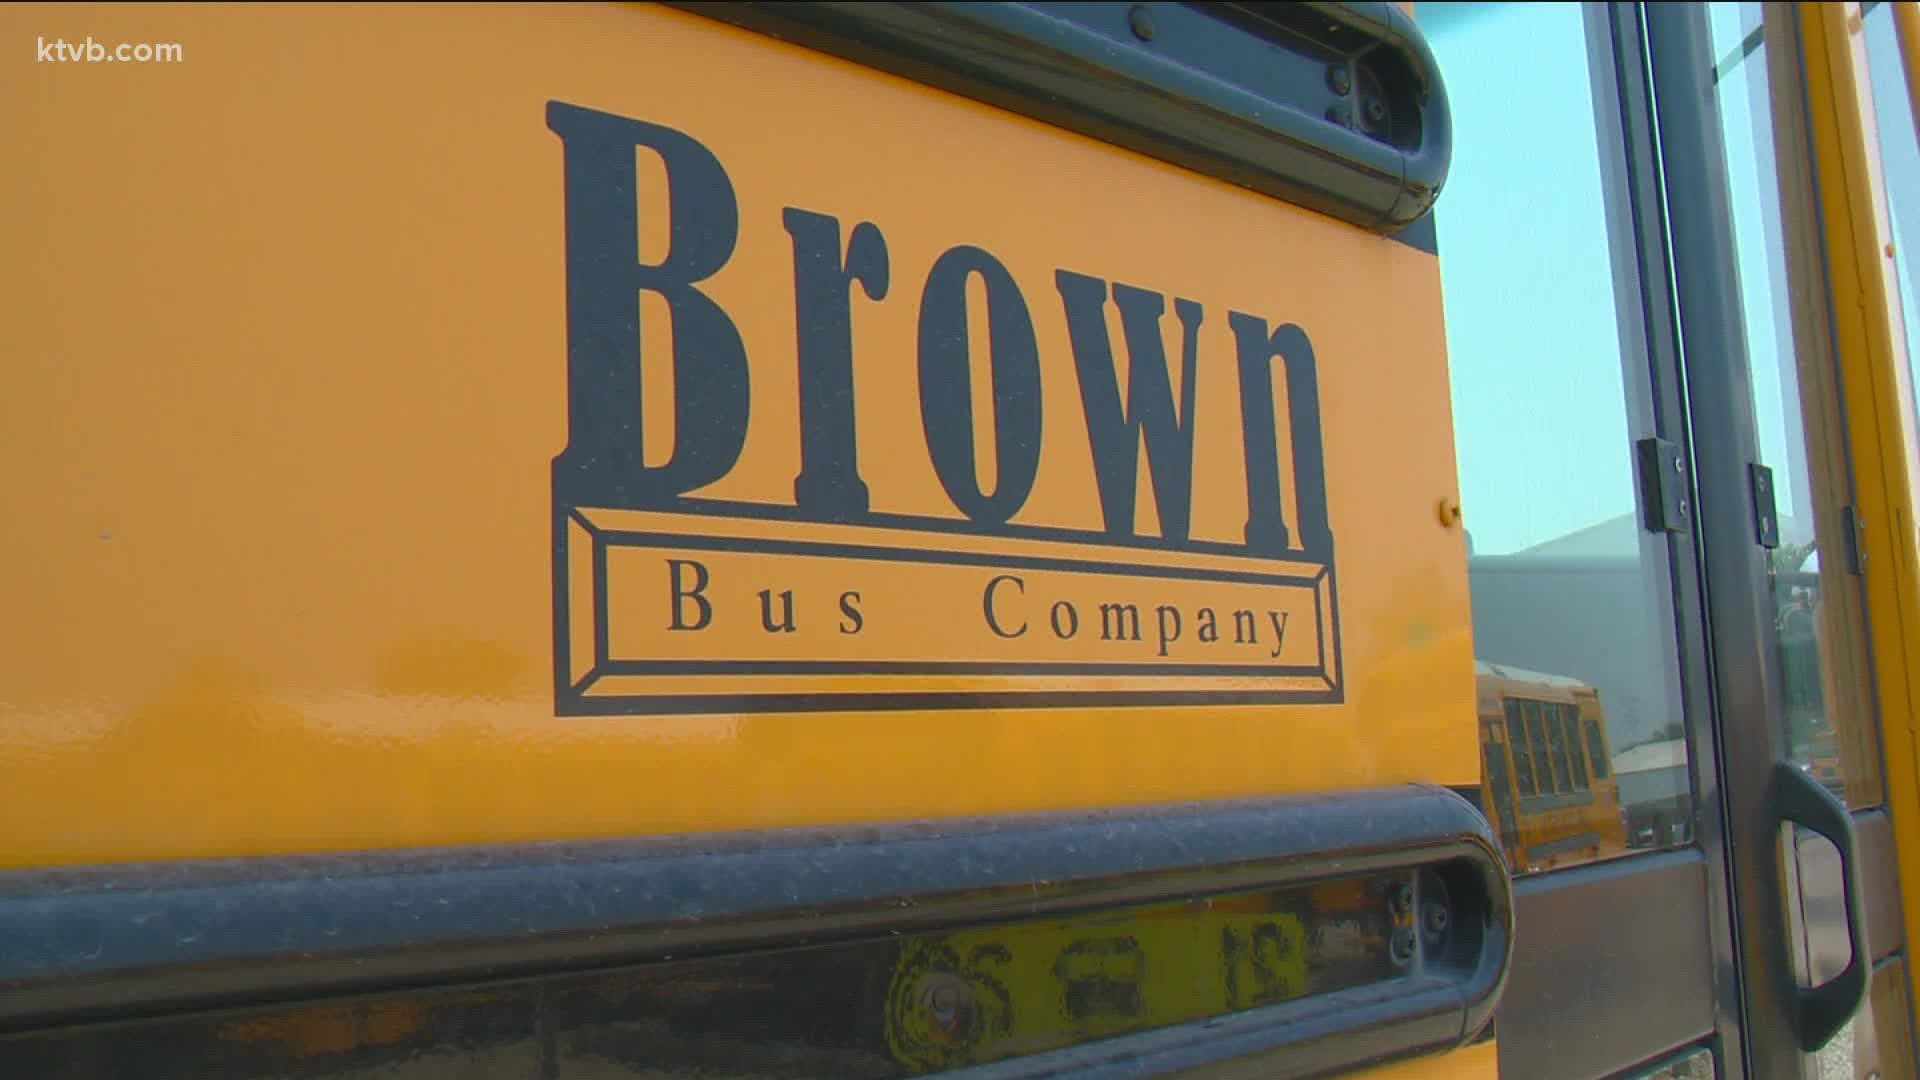 As the school year approaches, the Brown Bus Company only has about 75% of the staffing it wants.